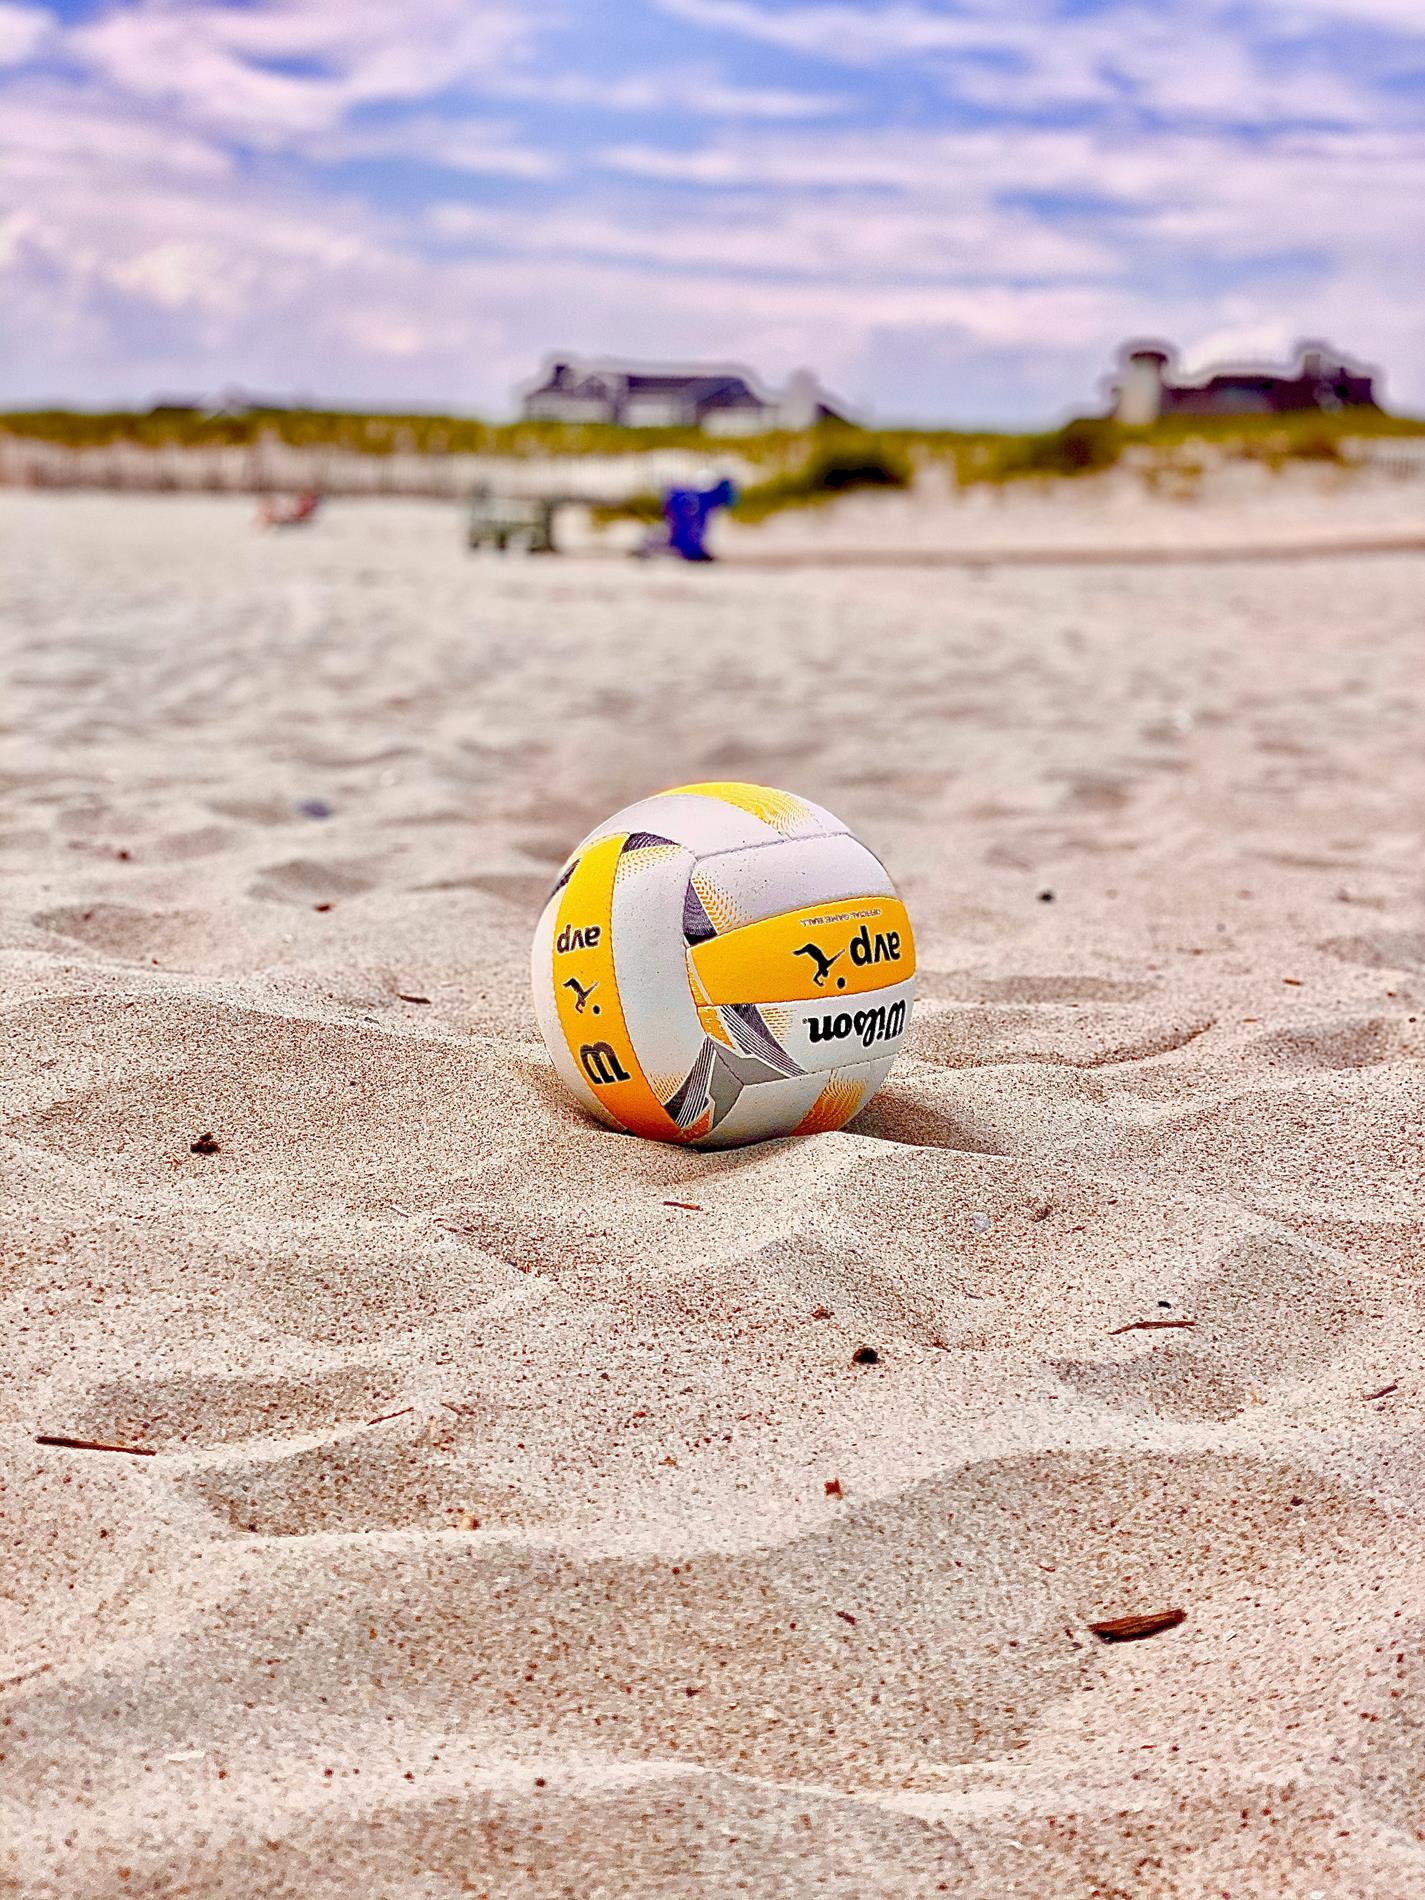 Ball in the Sand